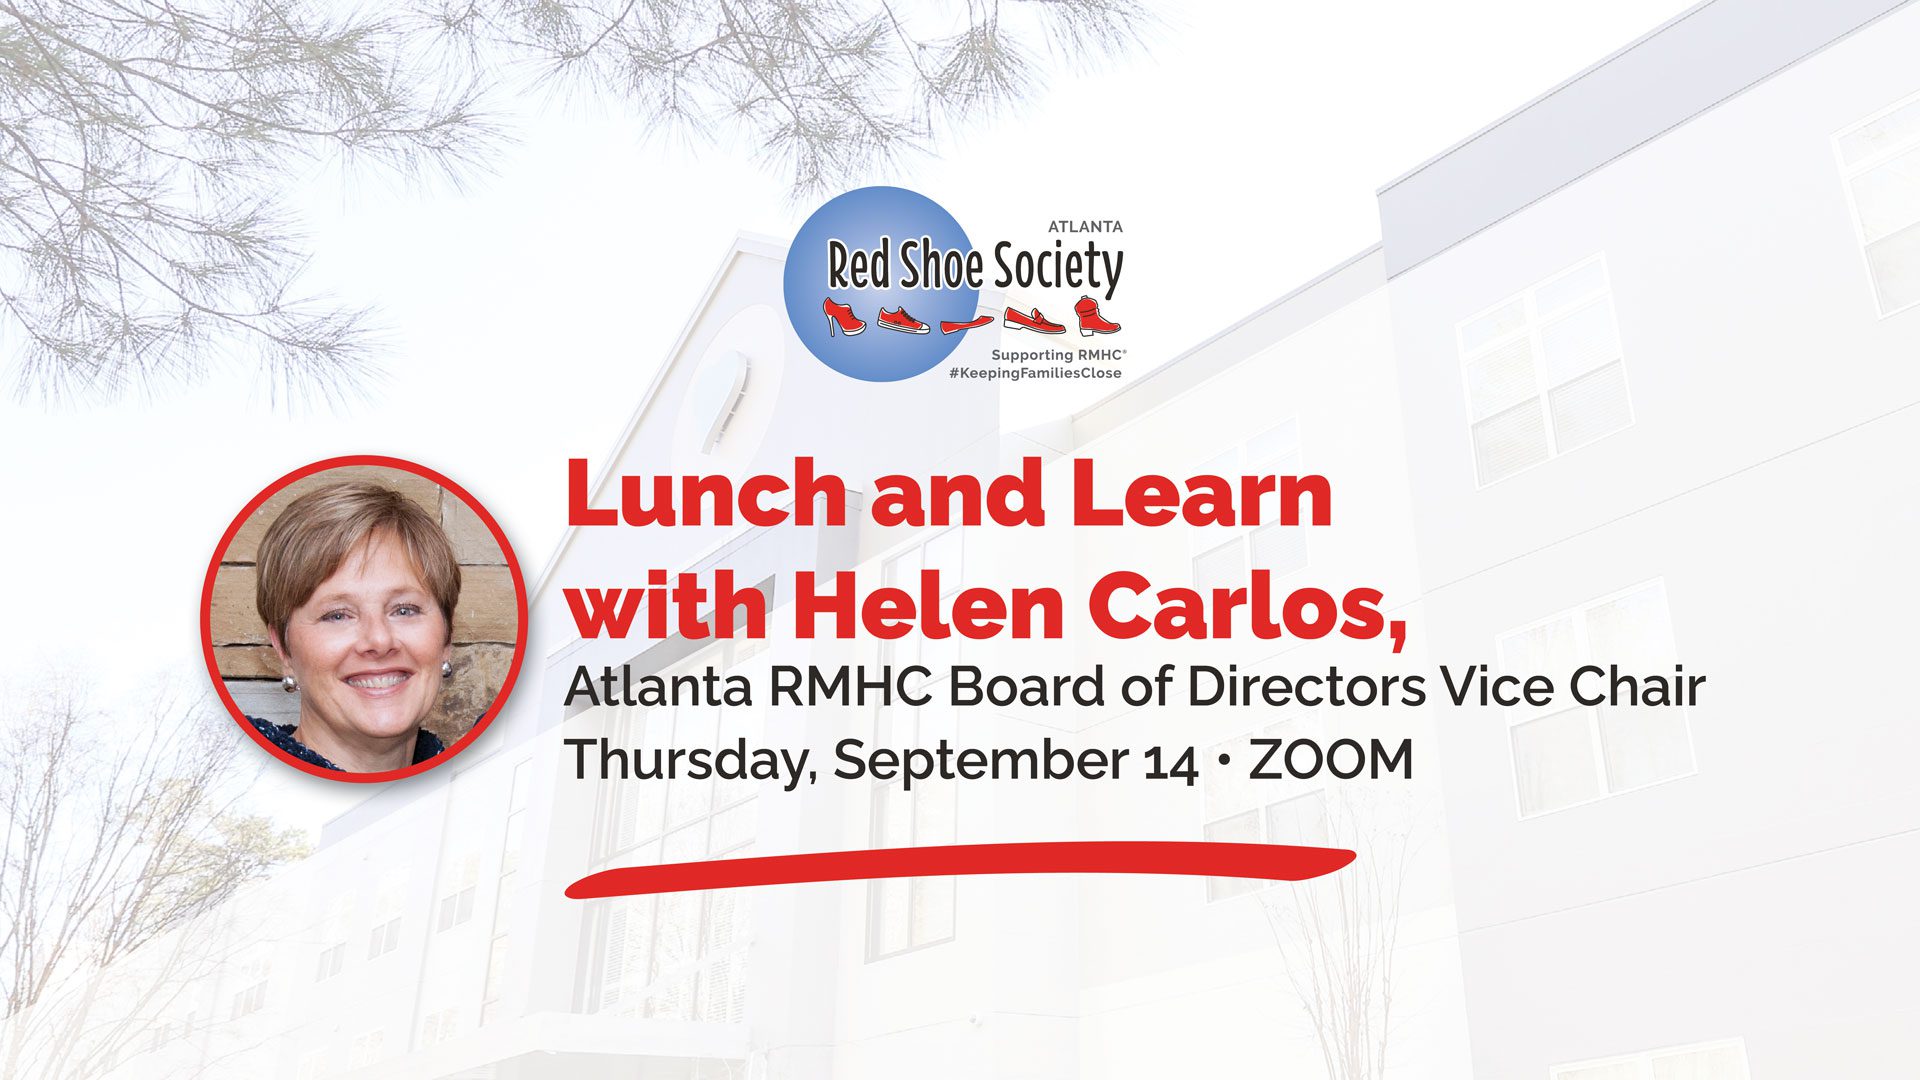 Red Shoe Society Lunch and Learn with Helen Carlos